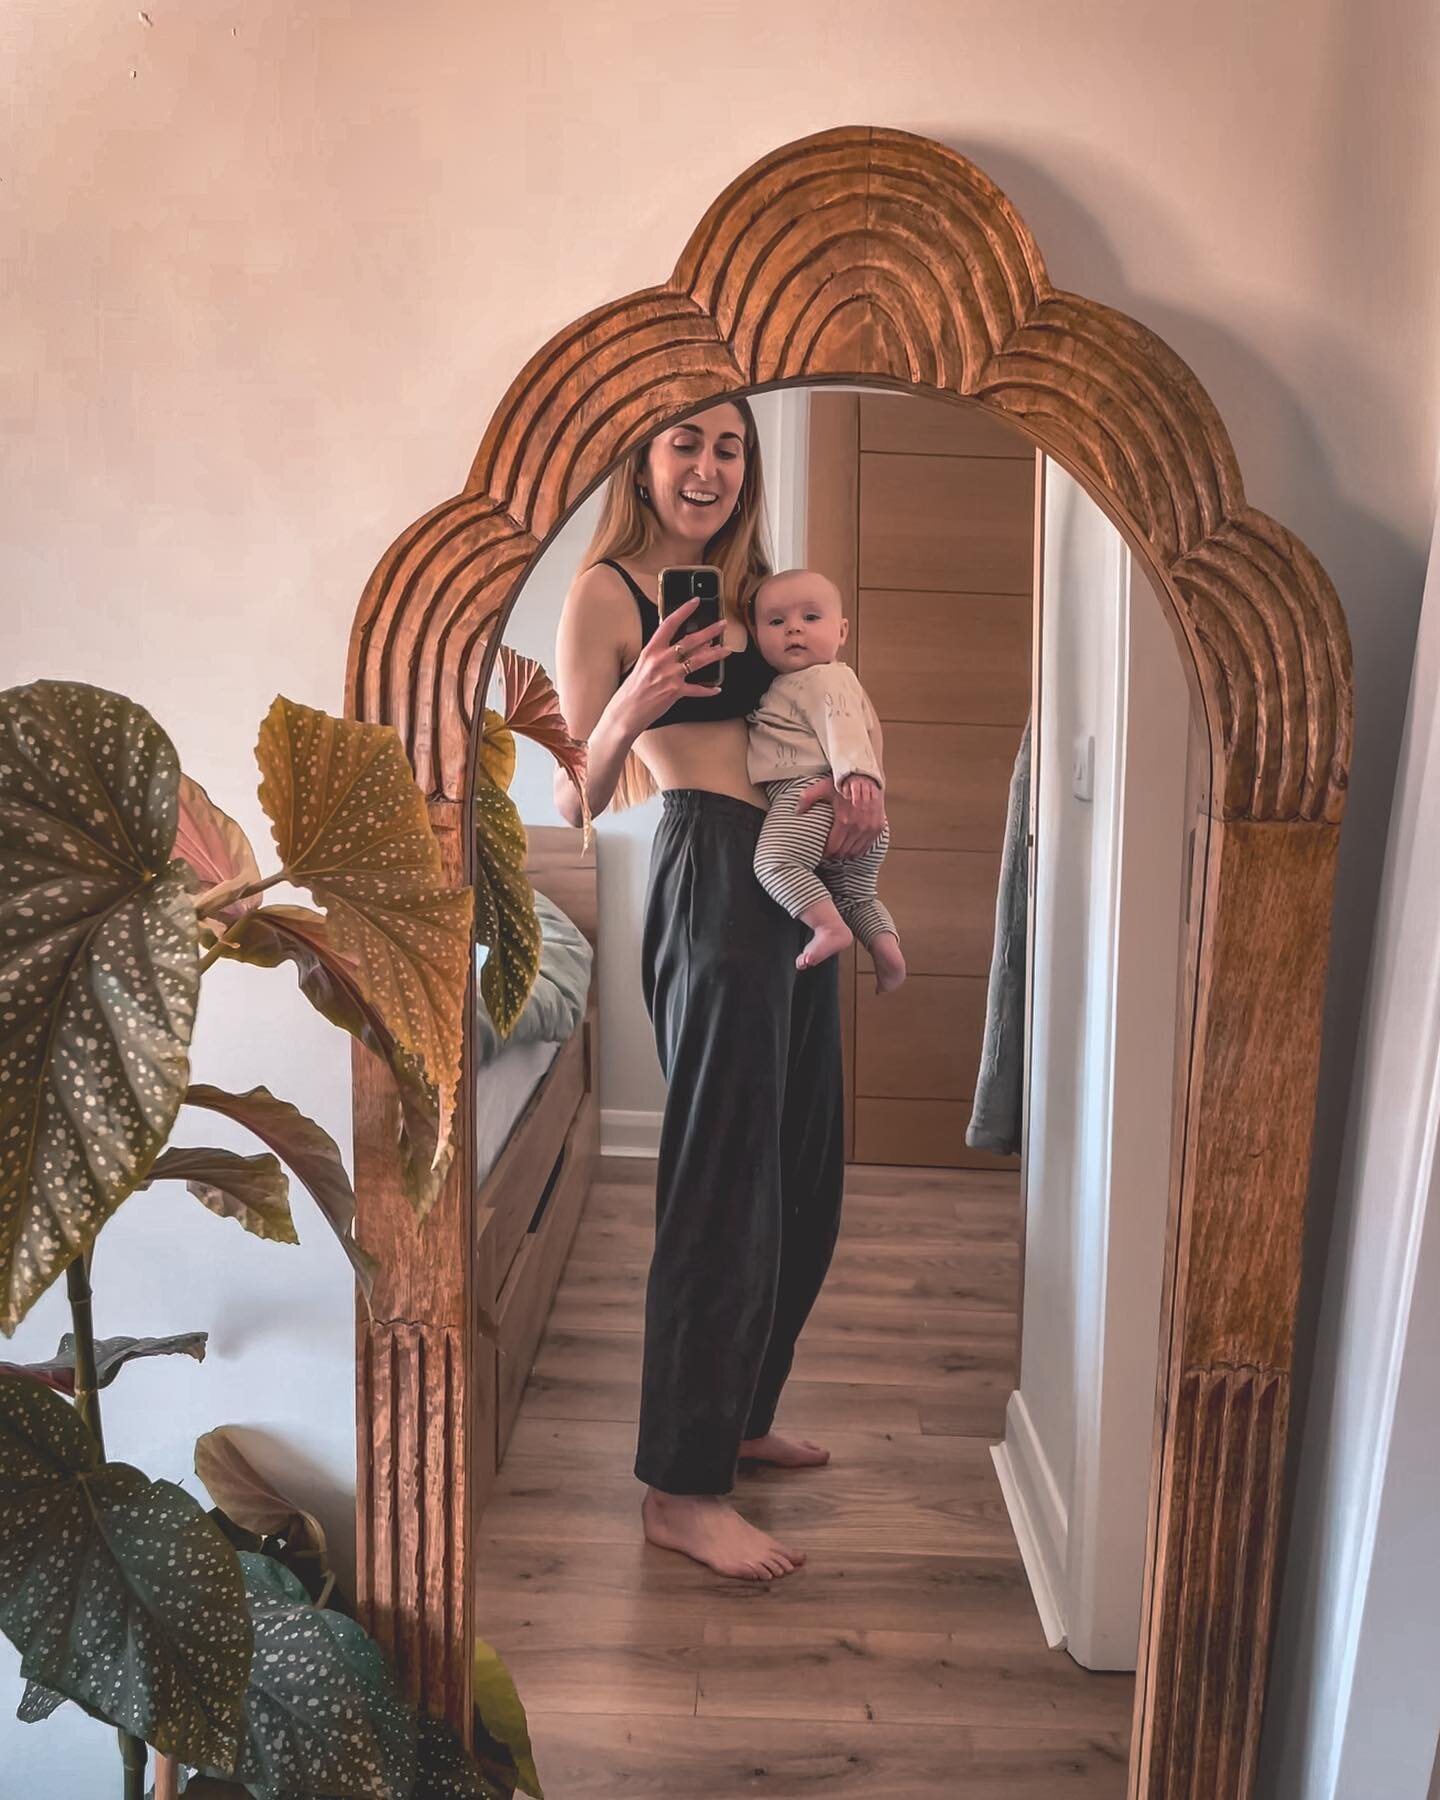 6 months out V 6 months in 🪄

Half a trip around the sun with my love bug 🧸 totally in awe of the female body. This journey is fucking wild. Beautiful, but wild. 

#postpartumjourney #motherhood #baby #pregnancyjourney